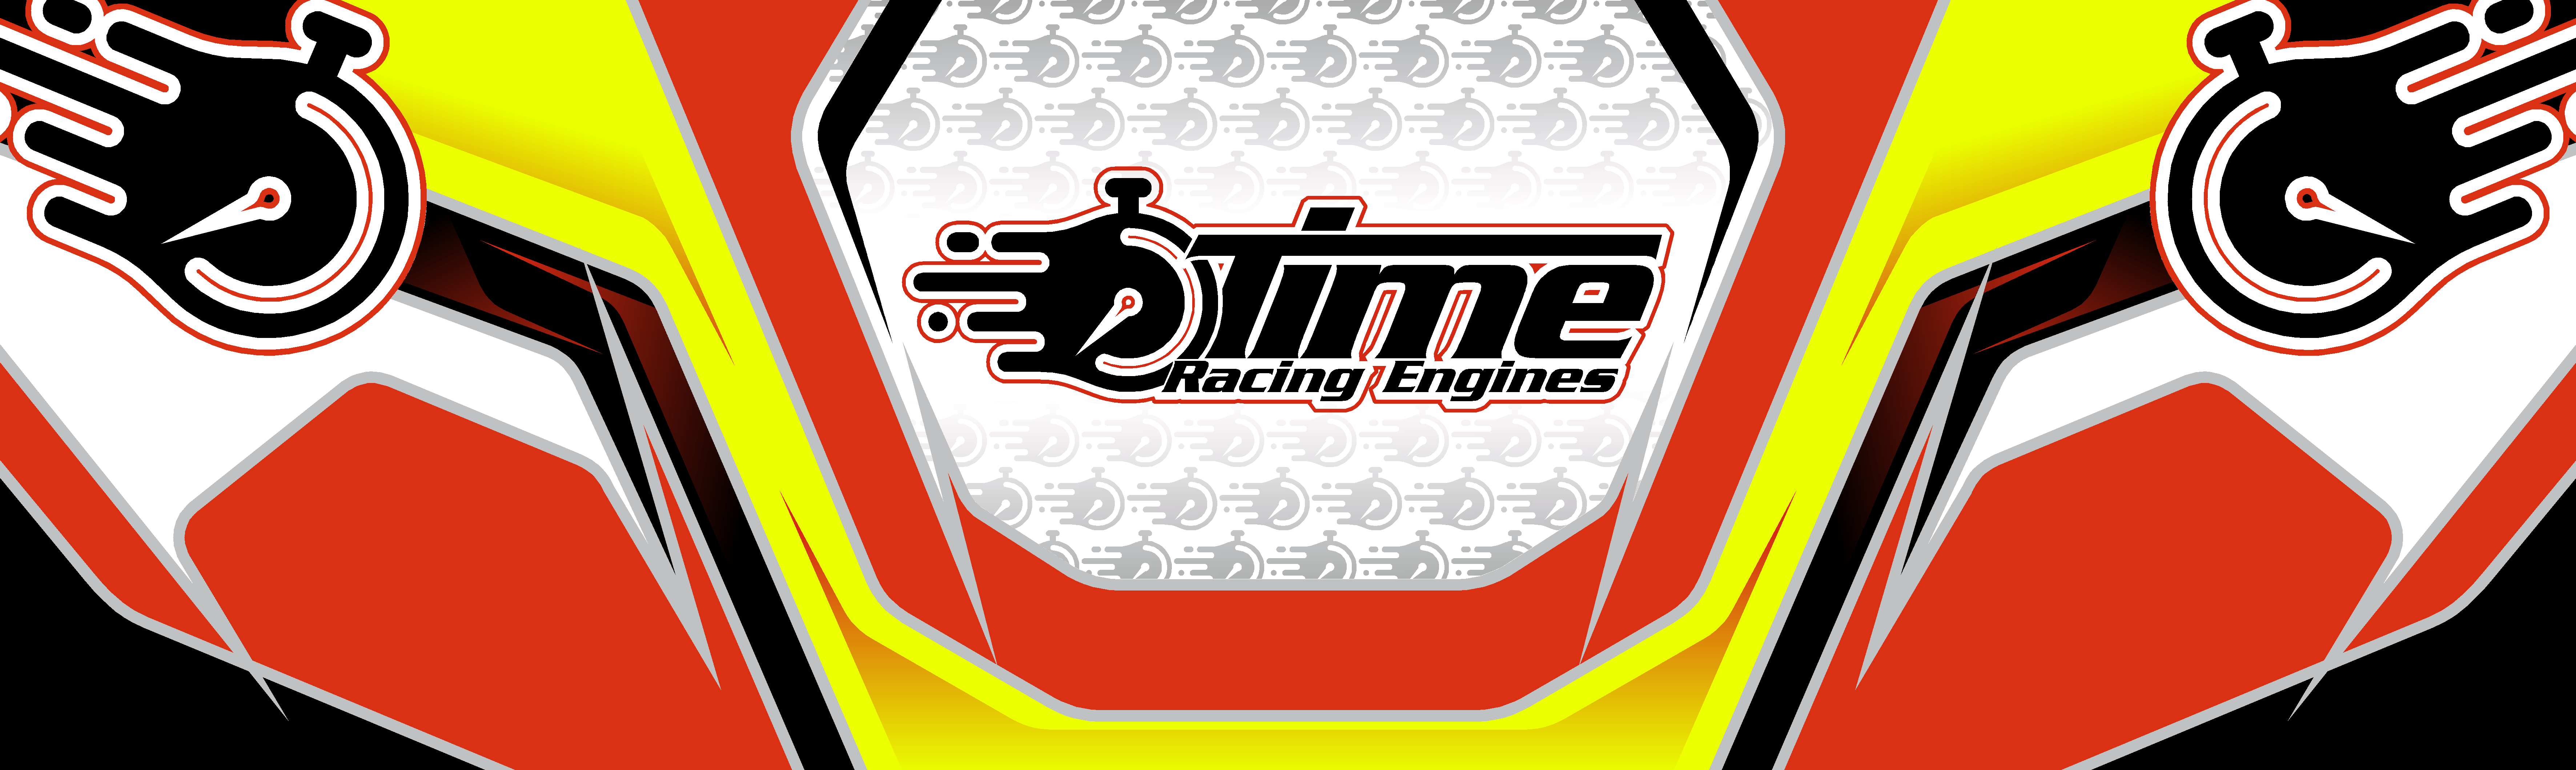 Time Racing Engines